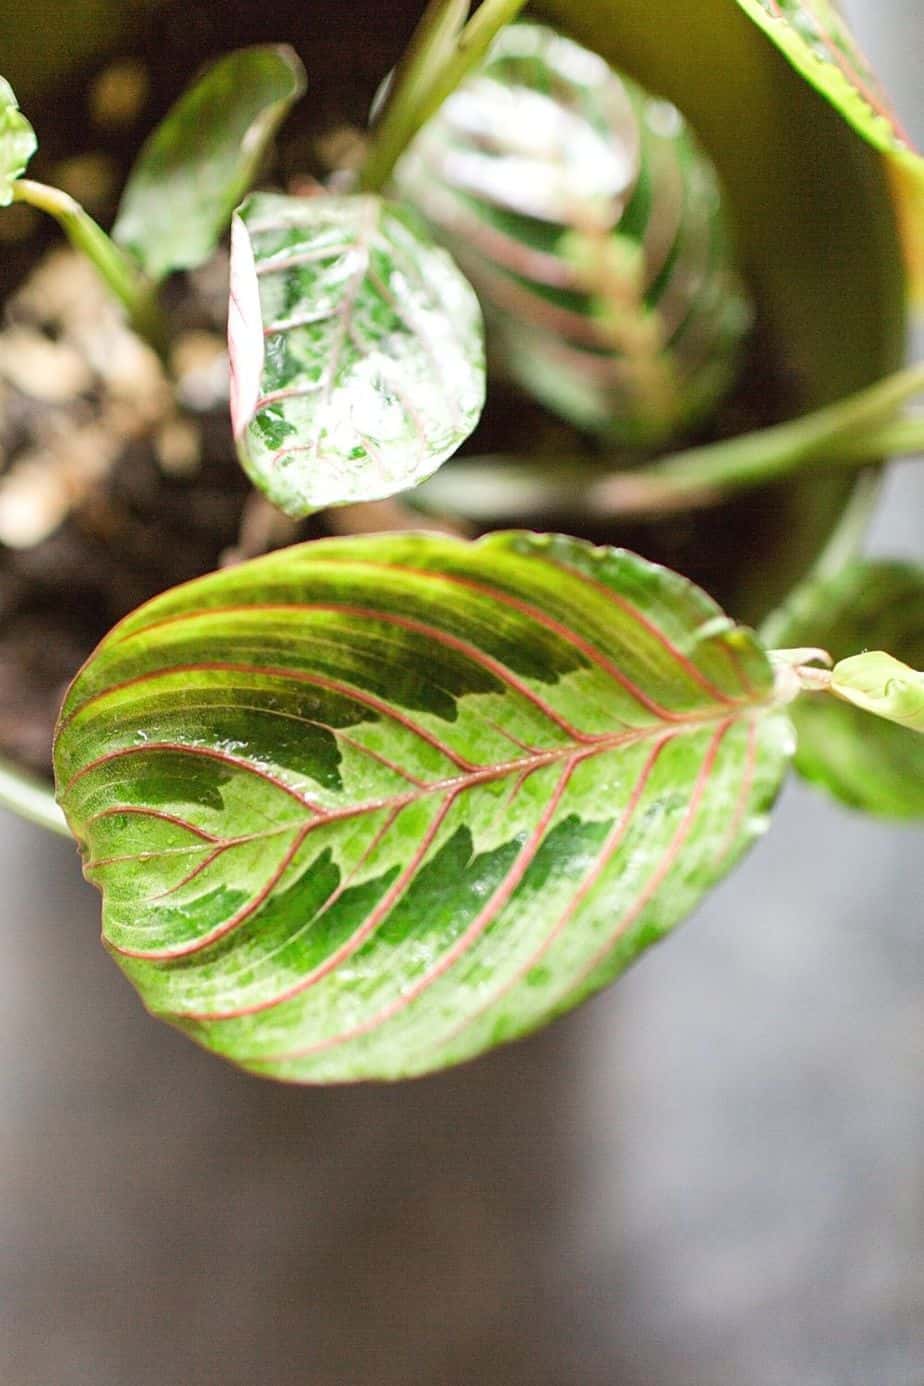 Prayer Plant is another plant that you can grow in water using cuttings